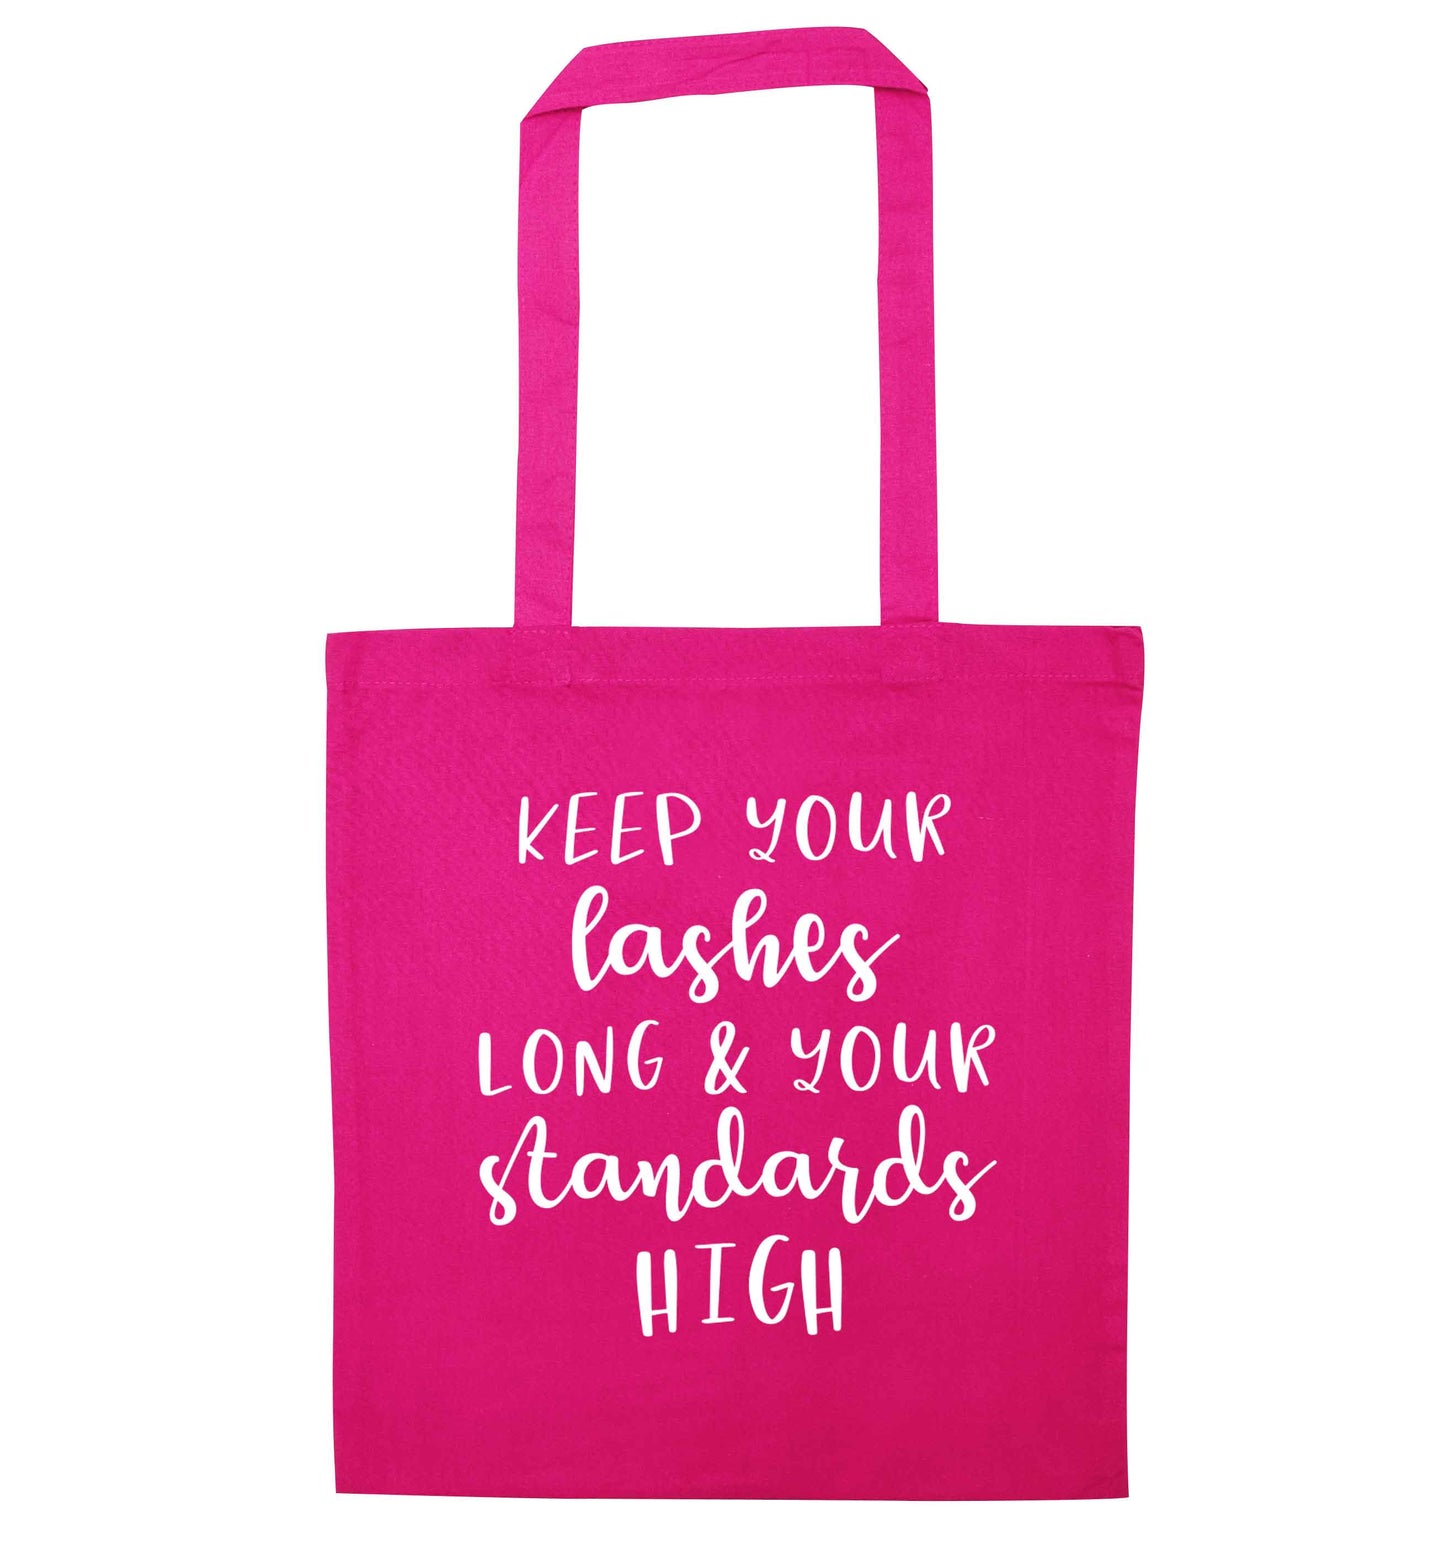 Keep your lashes long and your standards high pink tote bag